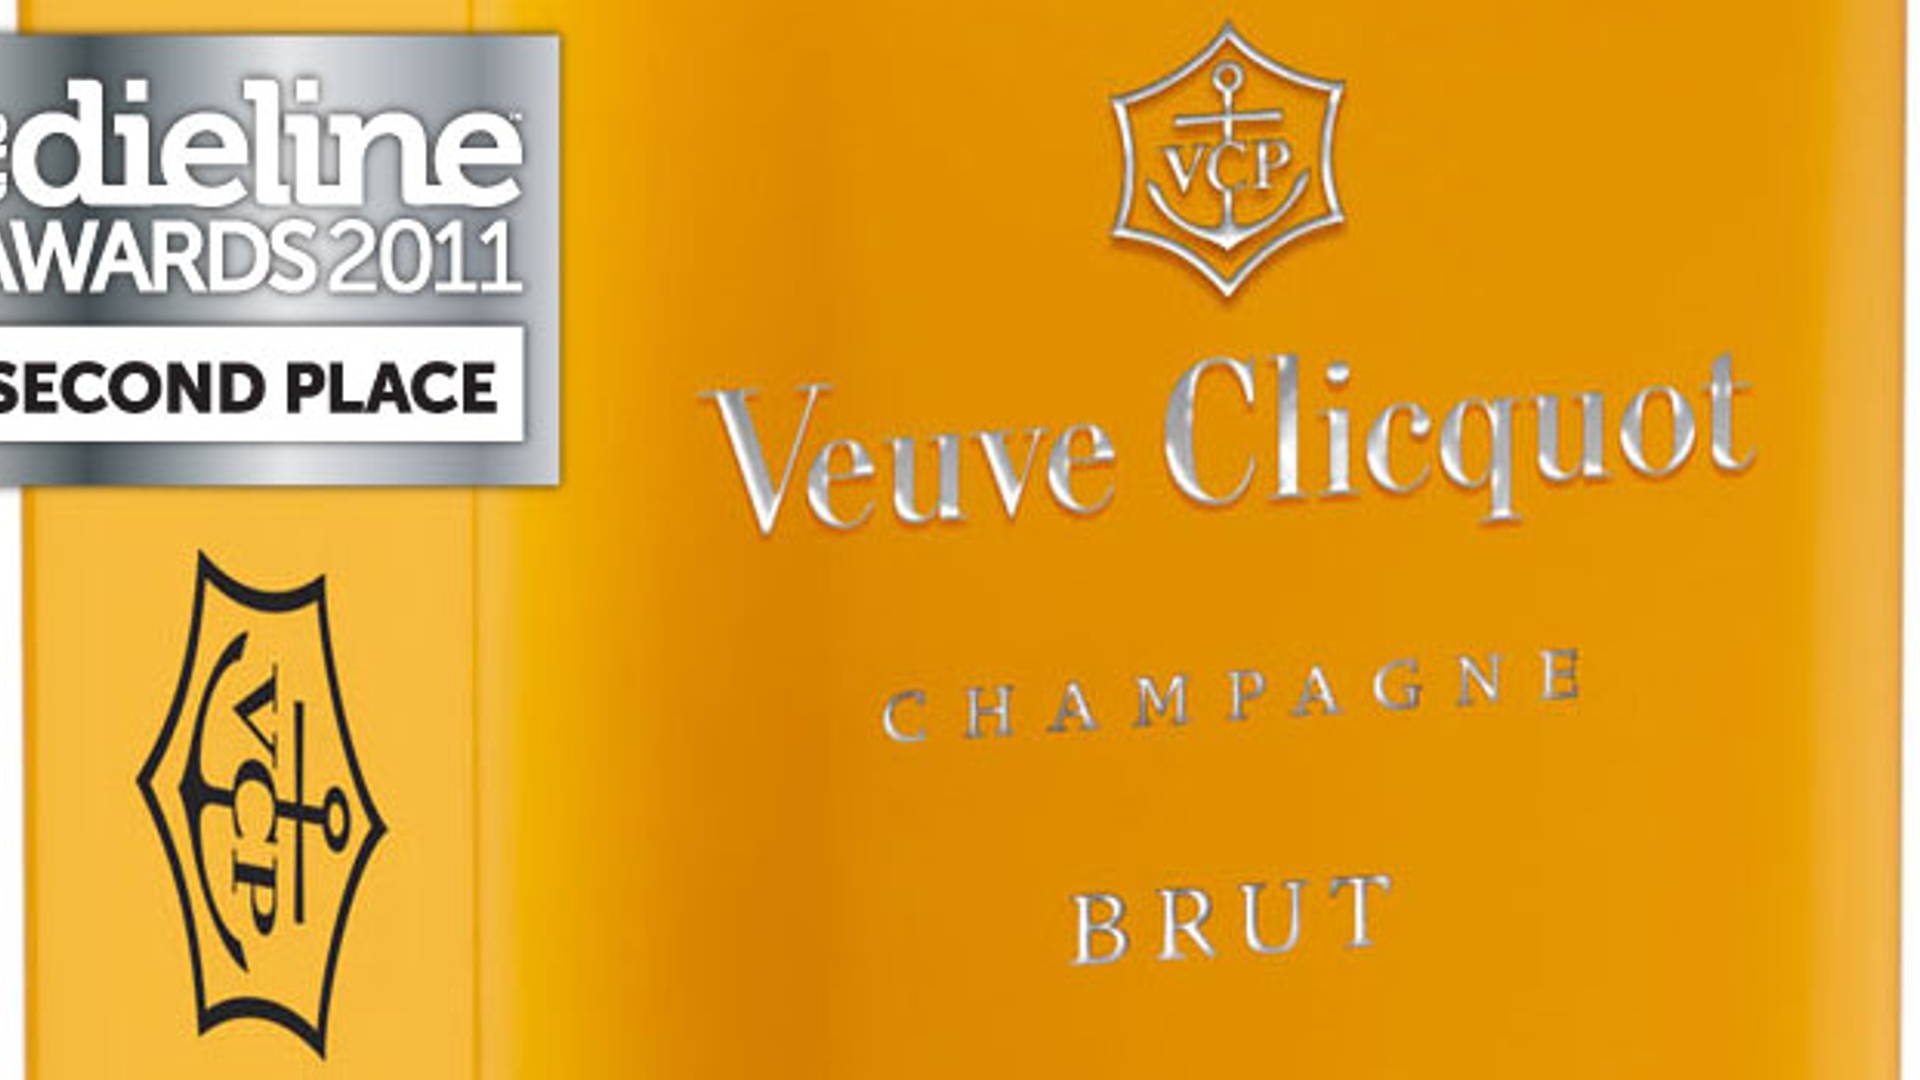 Featured image for The Dieline Awards 2011: Second Place - Veuve Clicquot Fridge